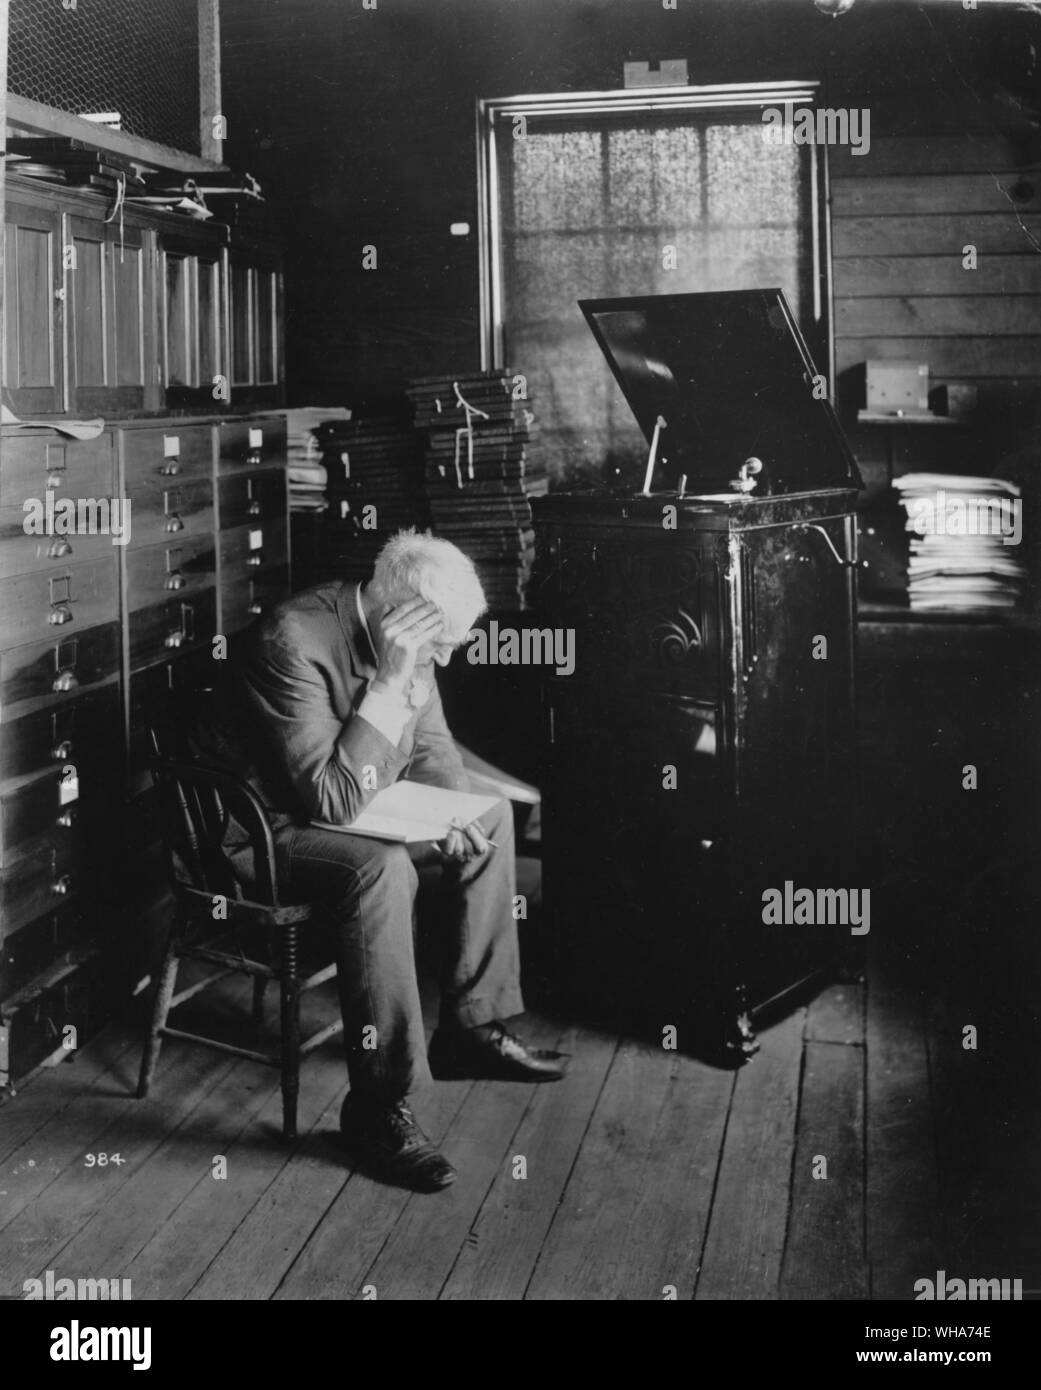 Thomas Edison listening to new disc phono. . Edison, Thomas Alva (the Wizard of Menlo Park) US inventor; opened research laboratory in Menlo Park, New Jersey 1876 (moved to West Orange, New Jersey 1887); invented phonograph (1st demonstrated 1877); invented incandescent electric light 1879; invented kinetograph camera and kinetoscope motion-picture viewer (patented 1891)  1847-1931 . . . . . . Stock Photo